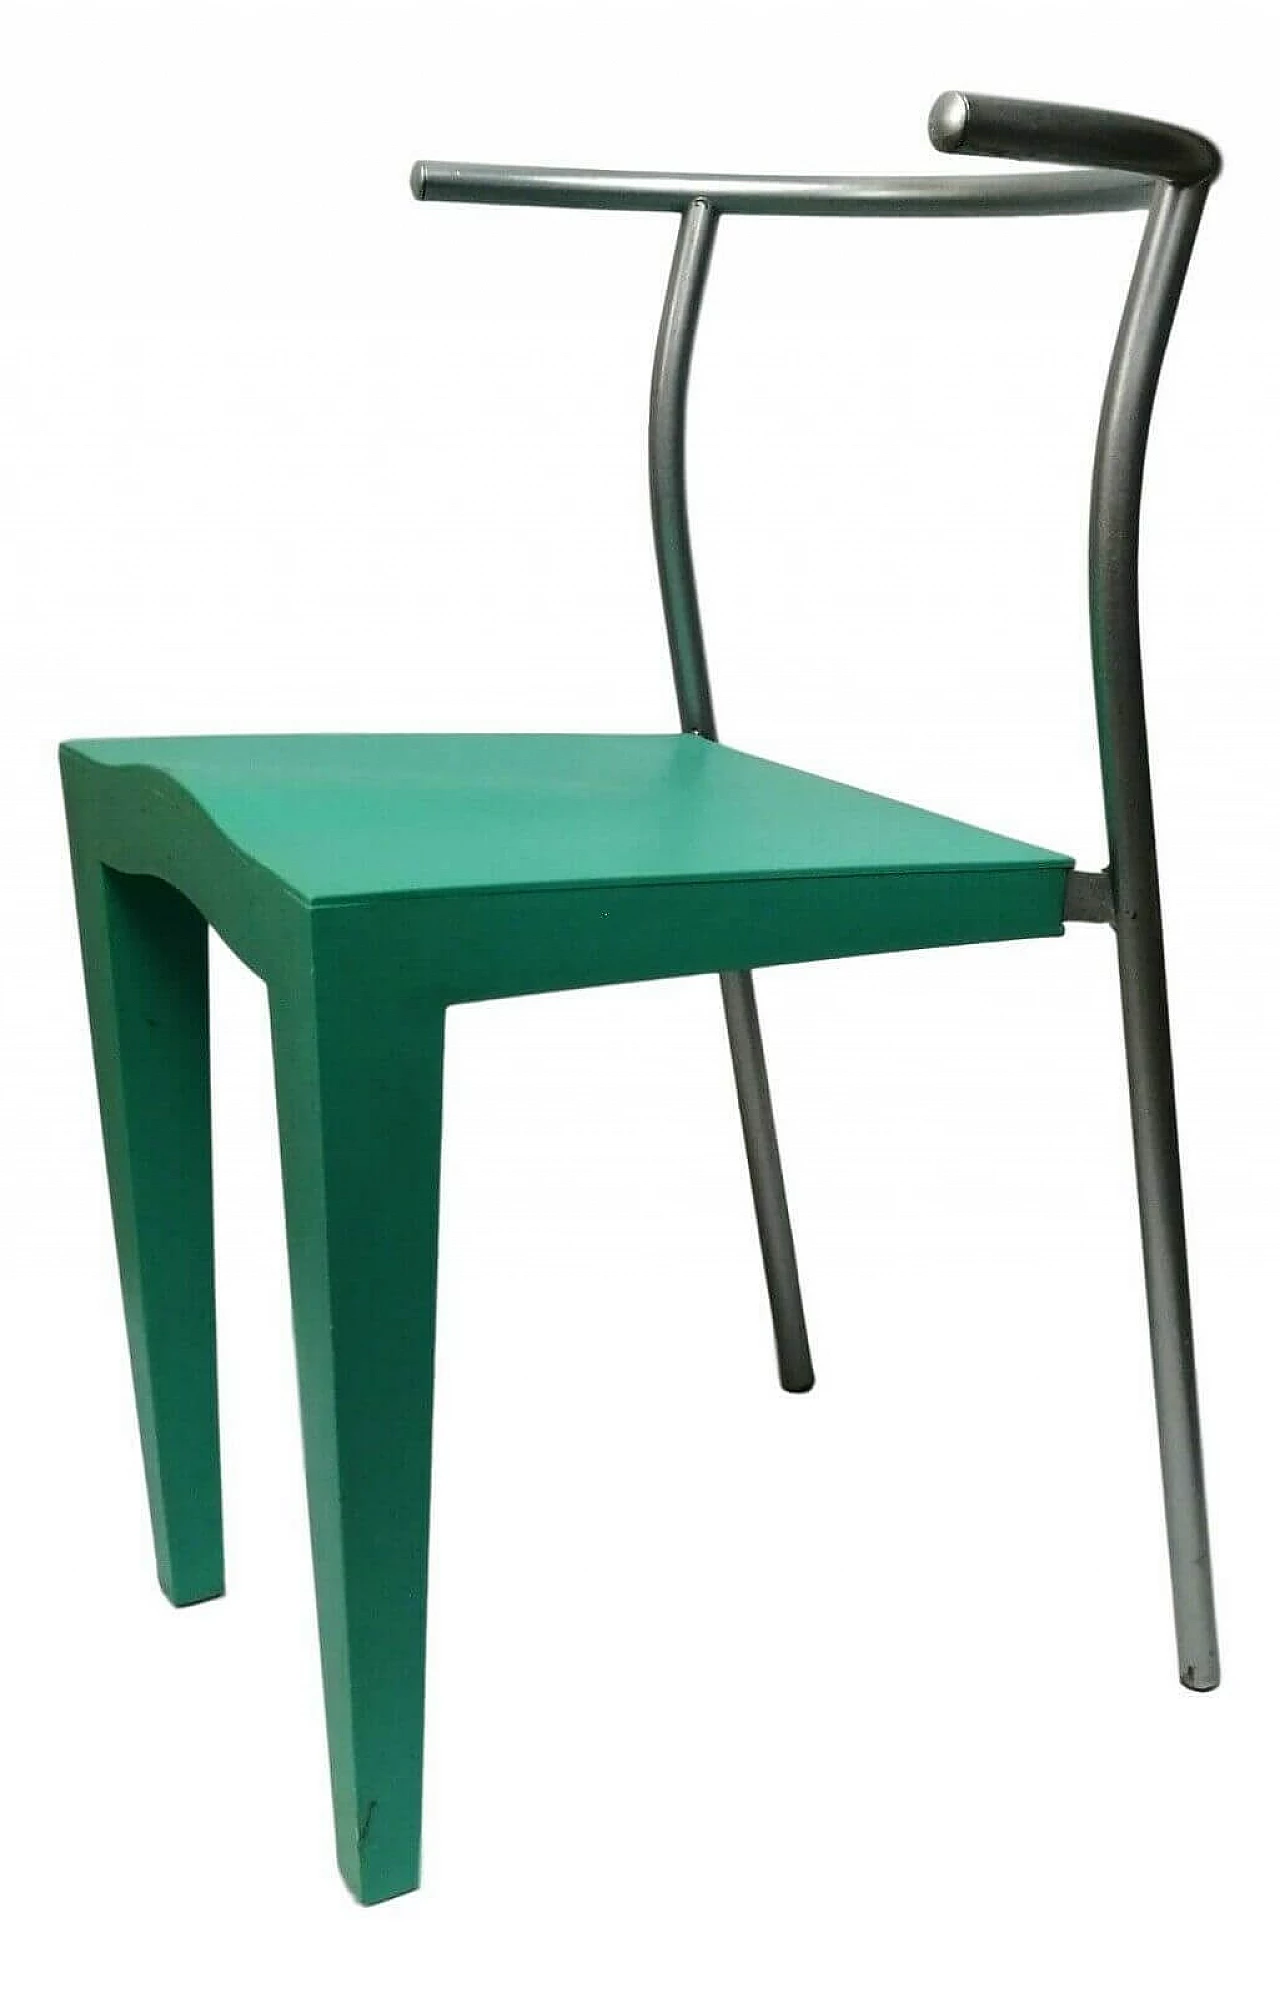 Dr Glob chair by Philippe Starck for Kartell, green, 1990s 1164734